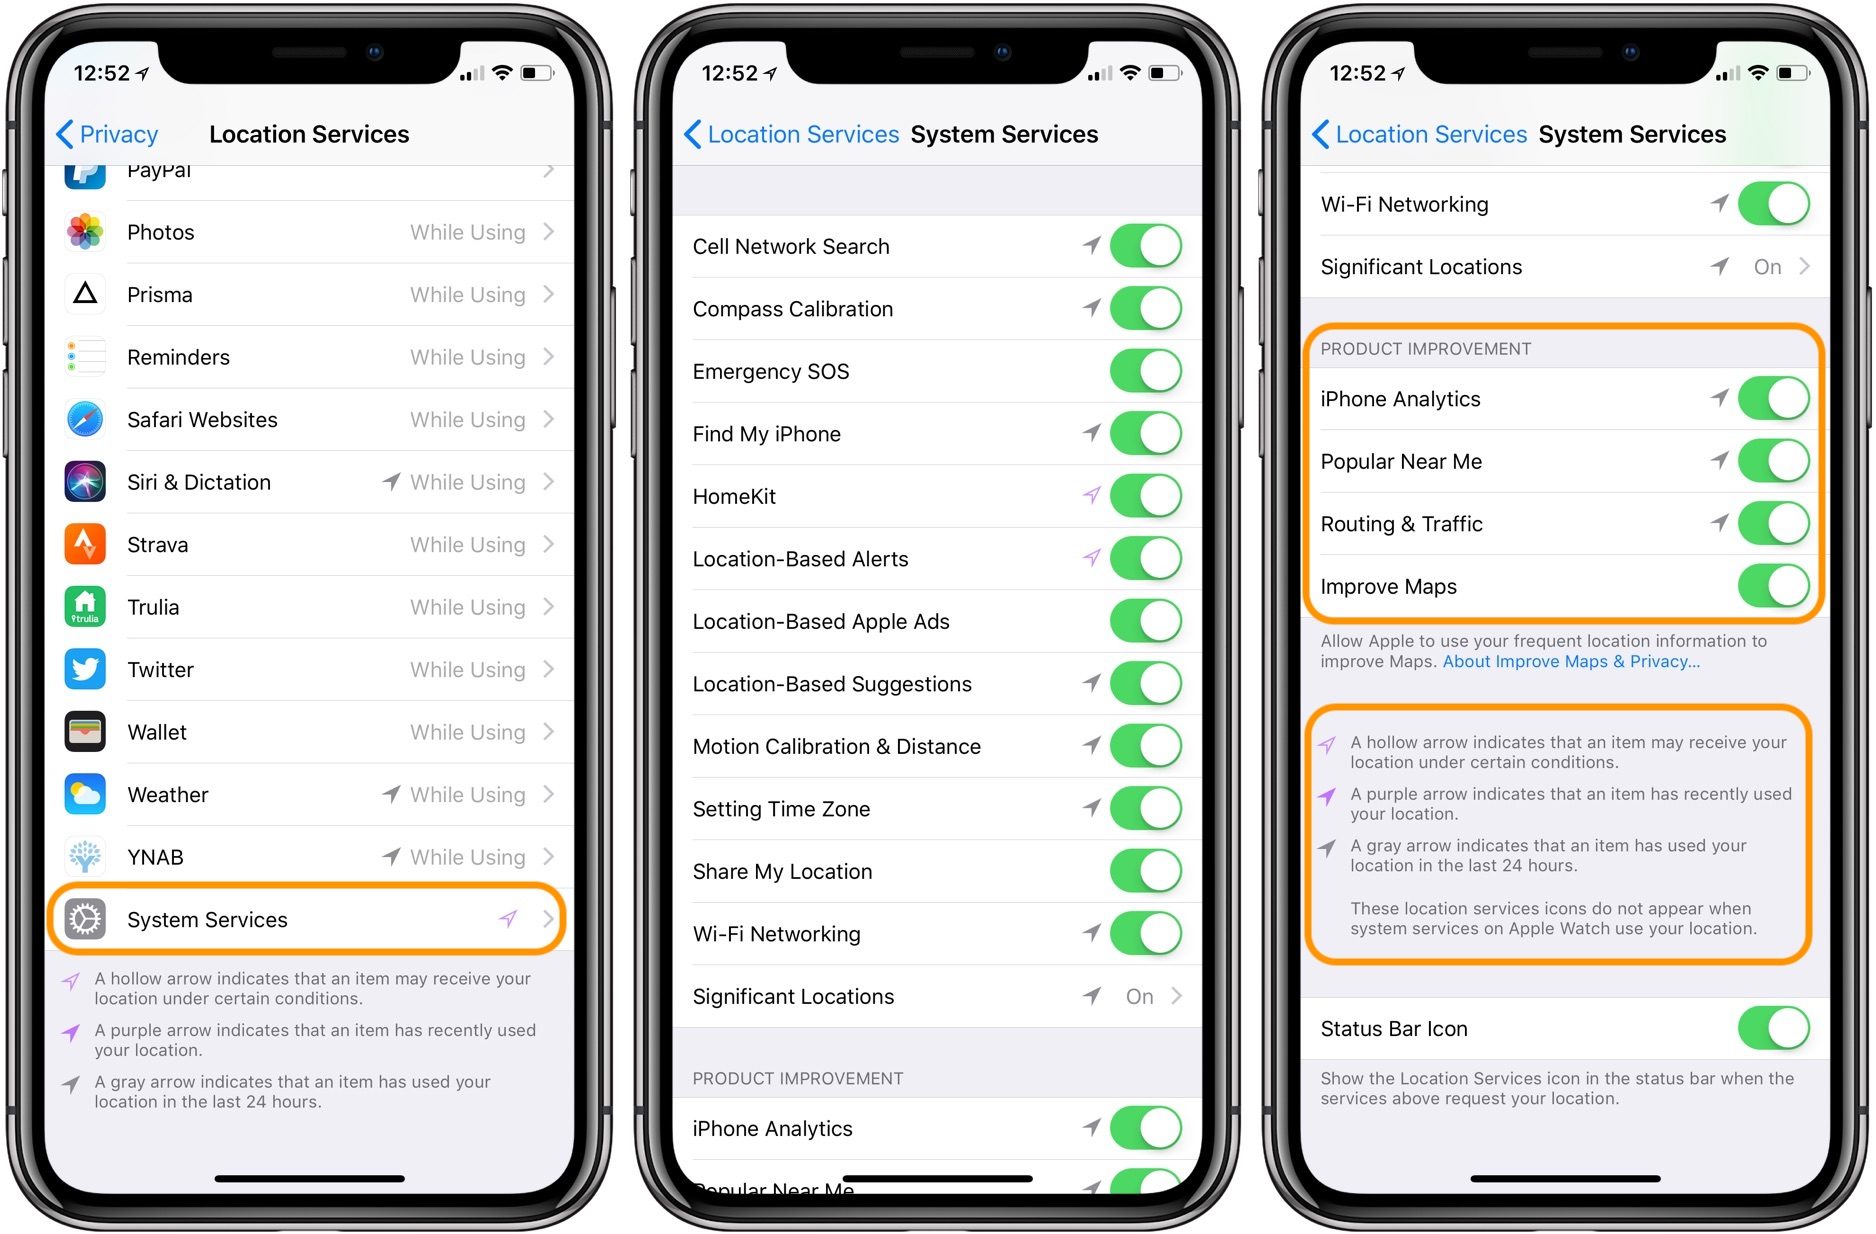 How to Protect Your iPhone Data with Privacy Controls Built in to iOS 11